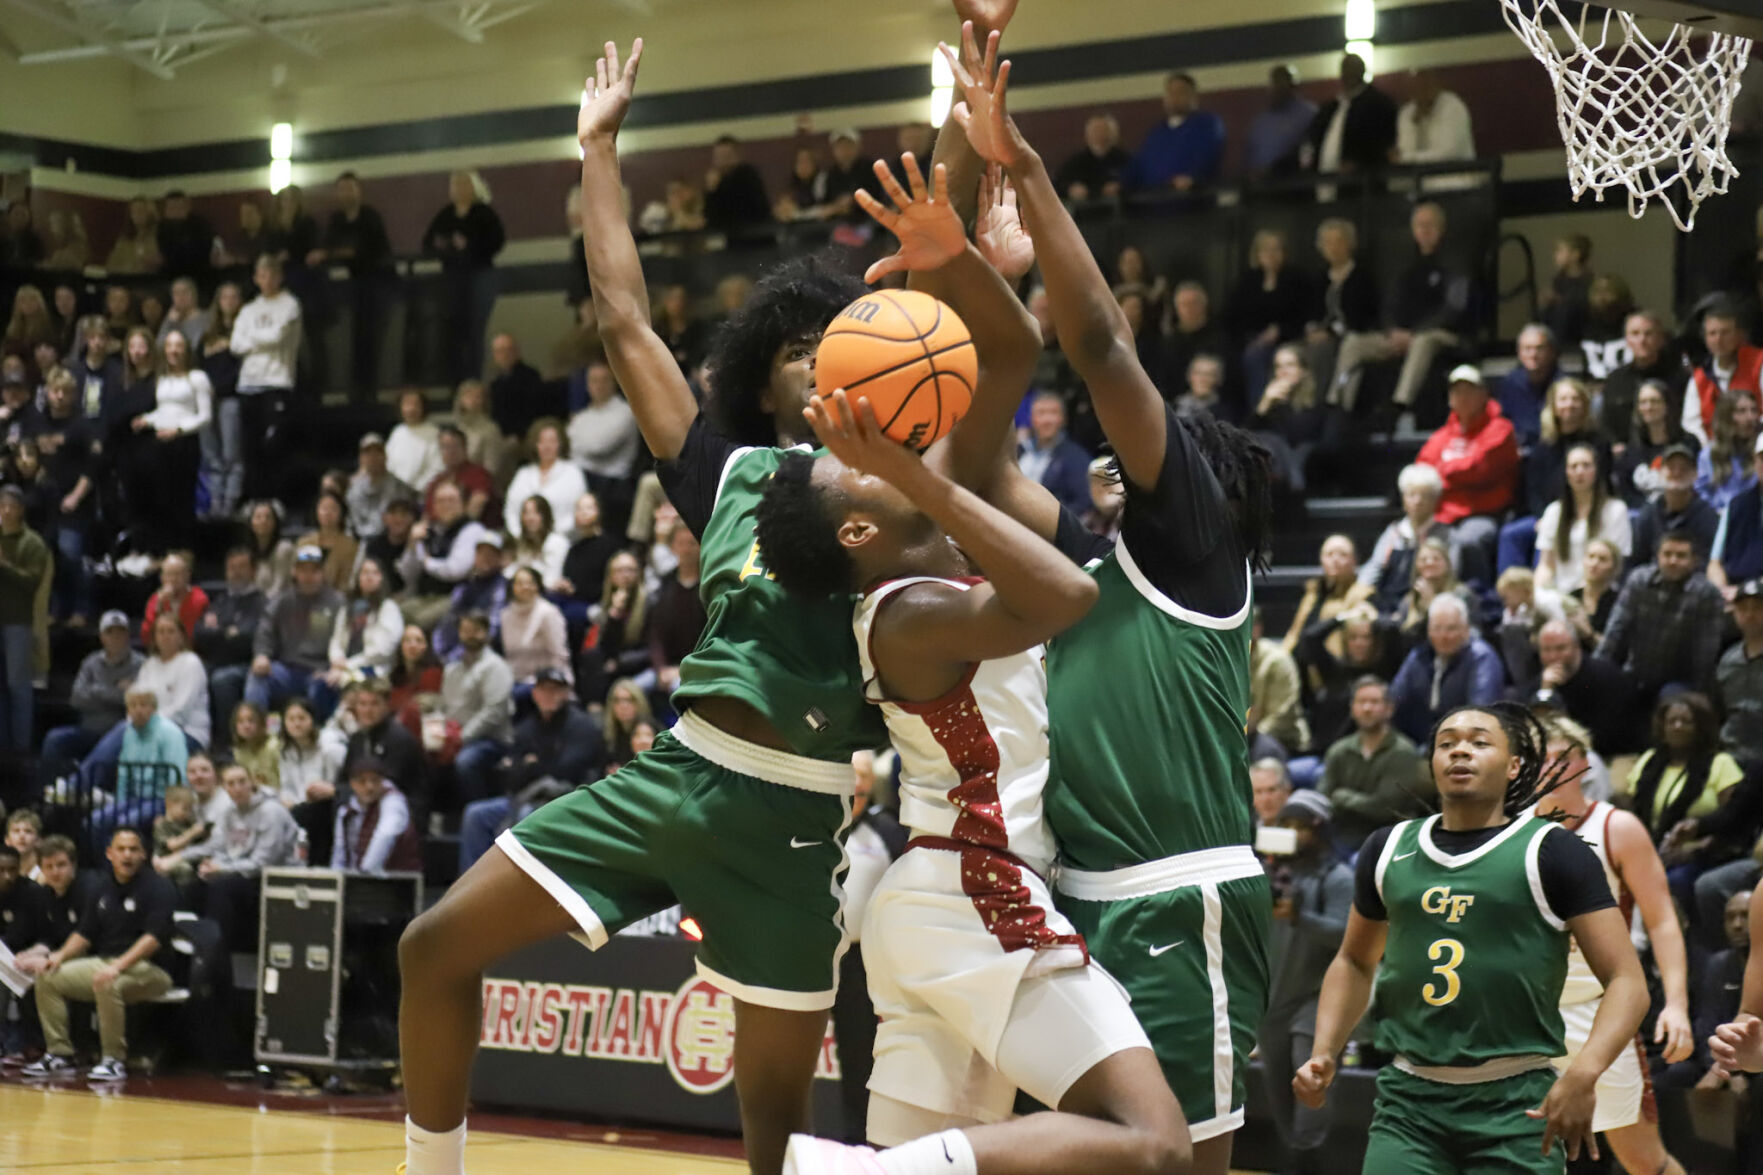 Greenforest Christian Triumphs Over Christian Heritage in a Close-Fought Battle